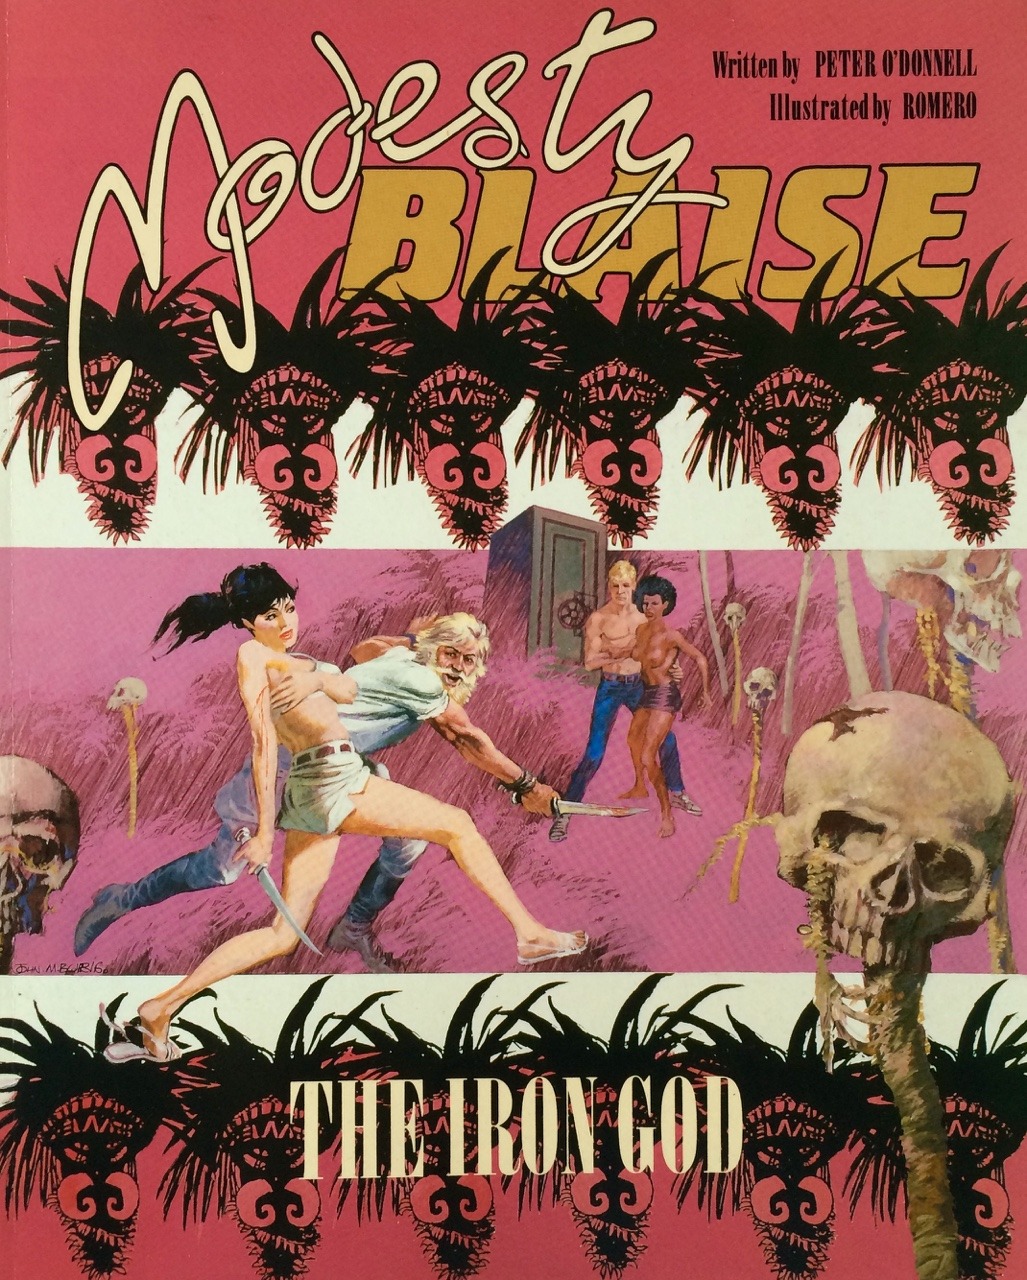 Modesty Blaise: The Iron God, written by Peter O’Donnell, illustrated by Romero.